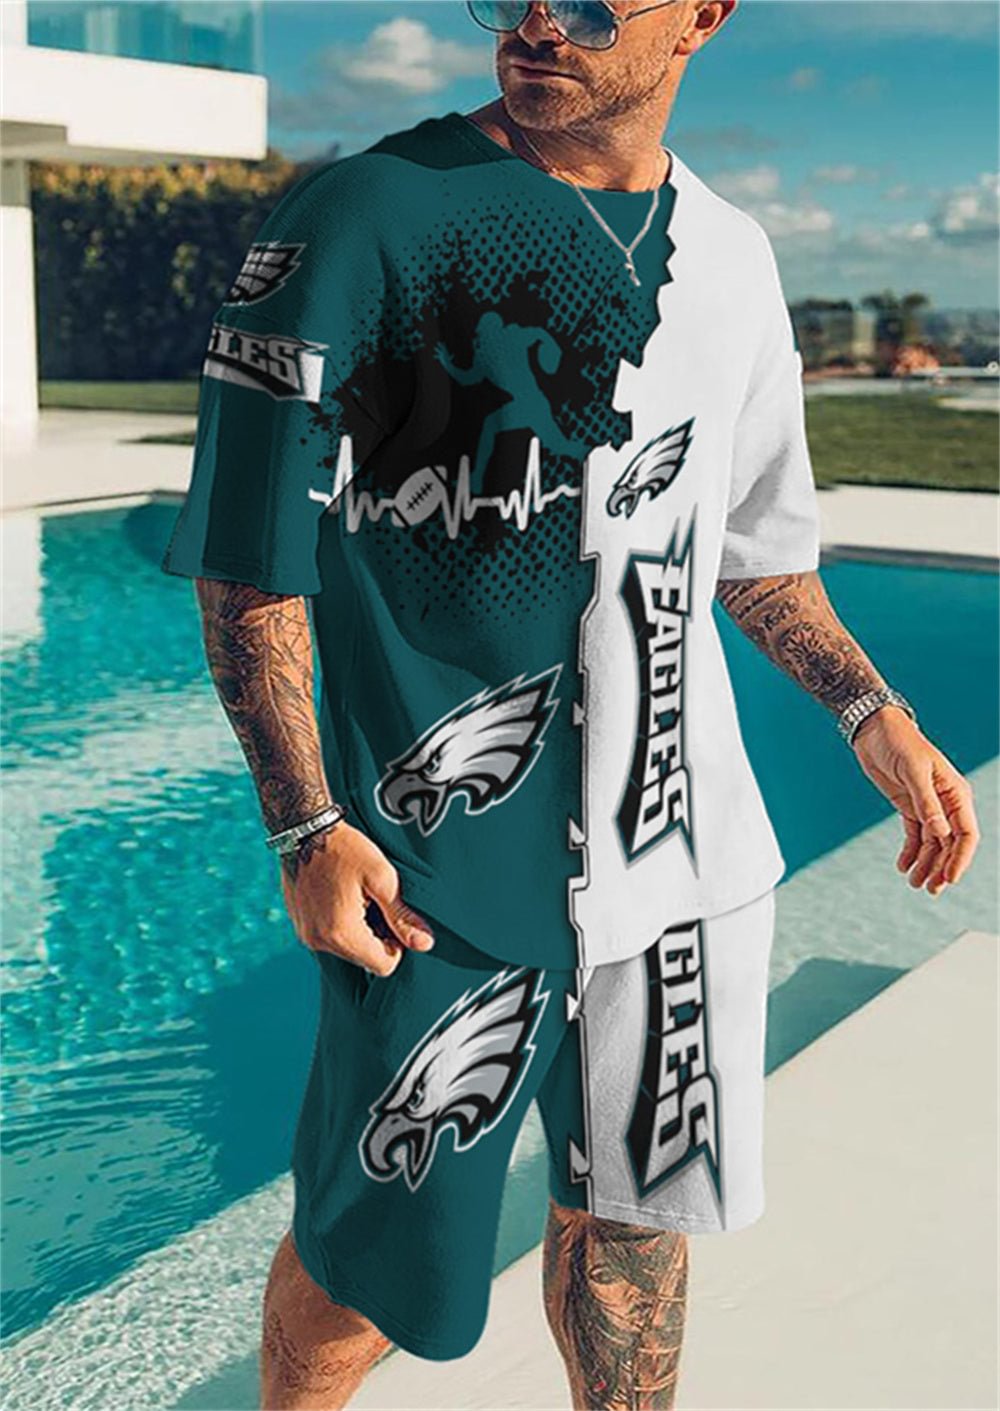 Philadelphia Eagles
Limited Edition Top And Shorts Two-Piece Suits